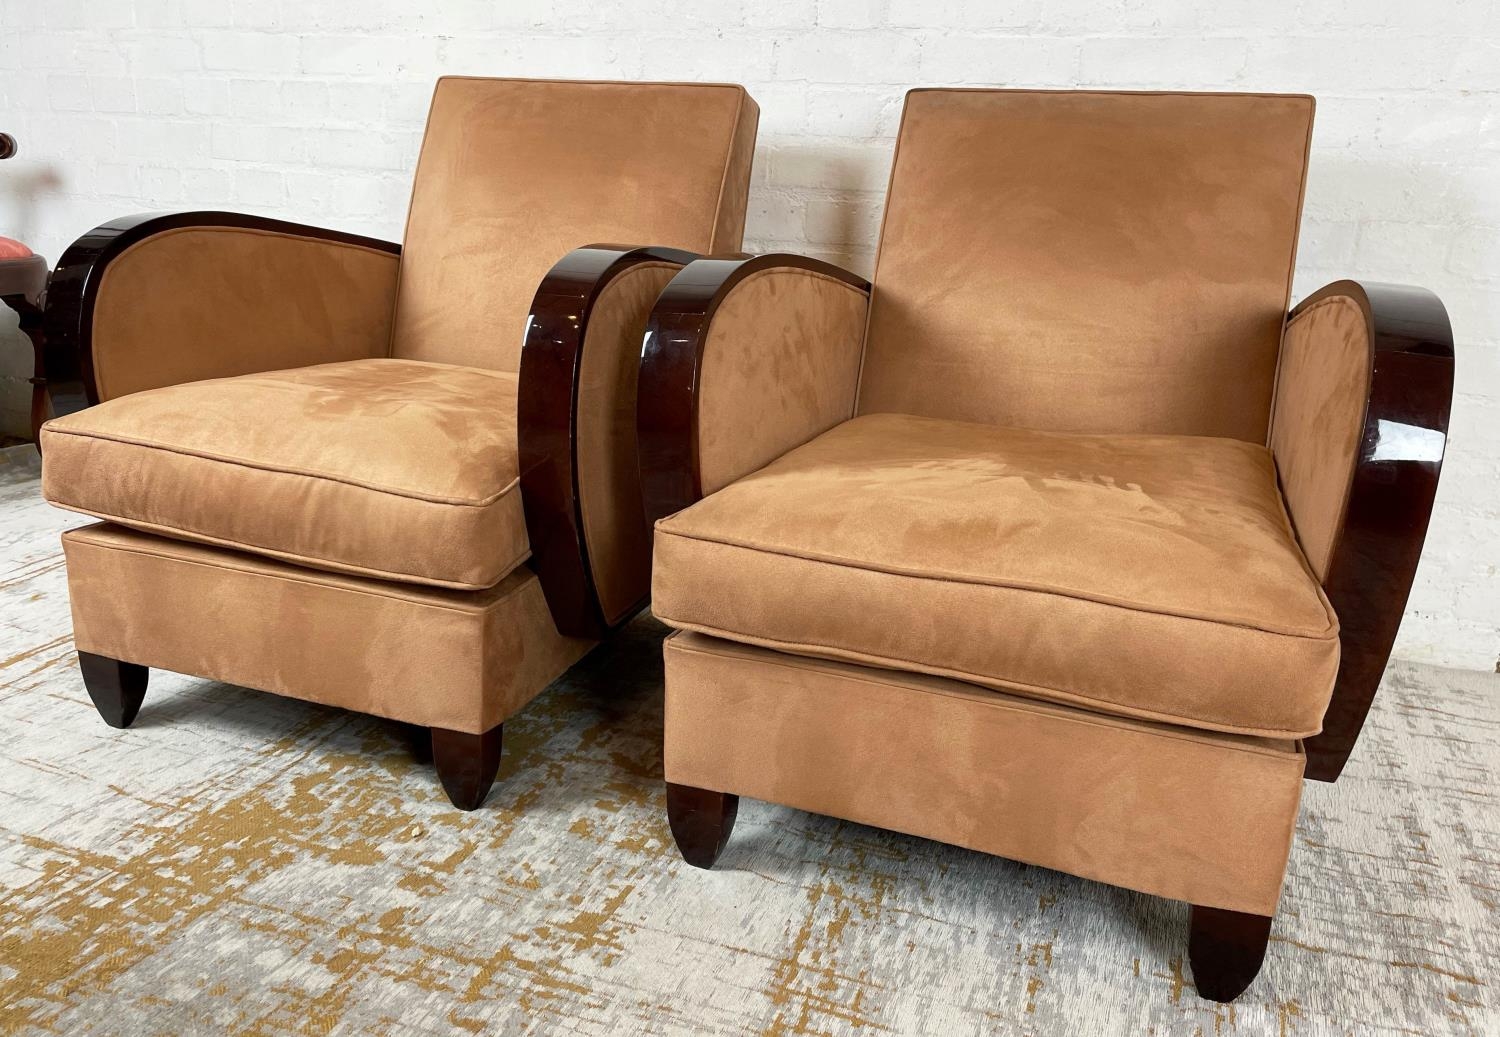 CLUB ARMCHAIRS, a pair, 78cm H x 68cm W x 88cm D, Art Deco style with brown suede upholstery. (2) - Image 2 of 4